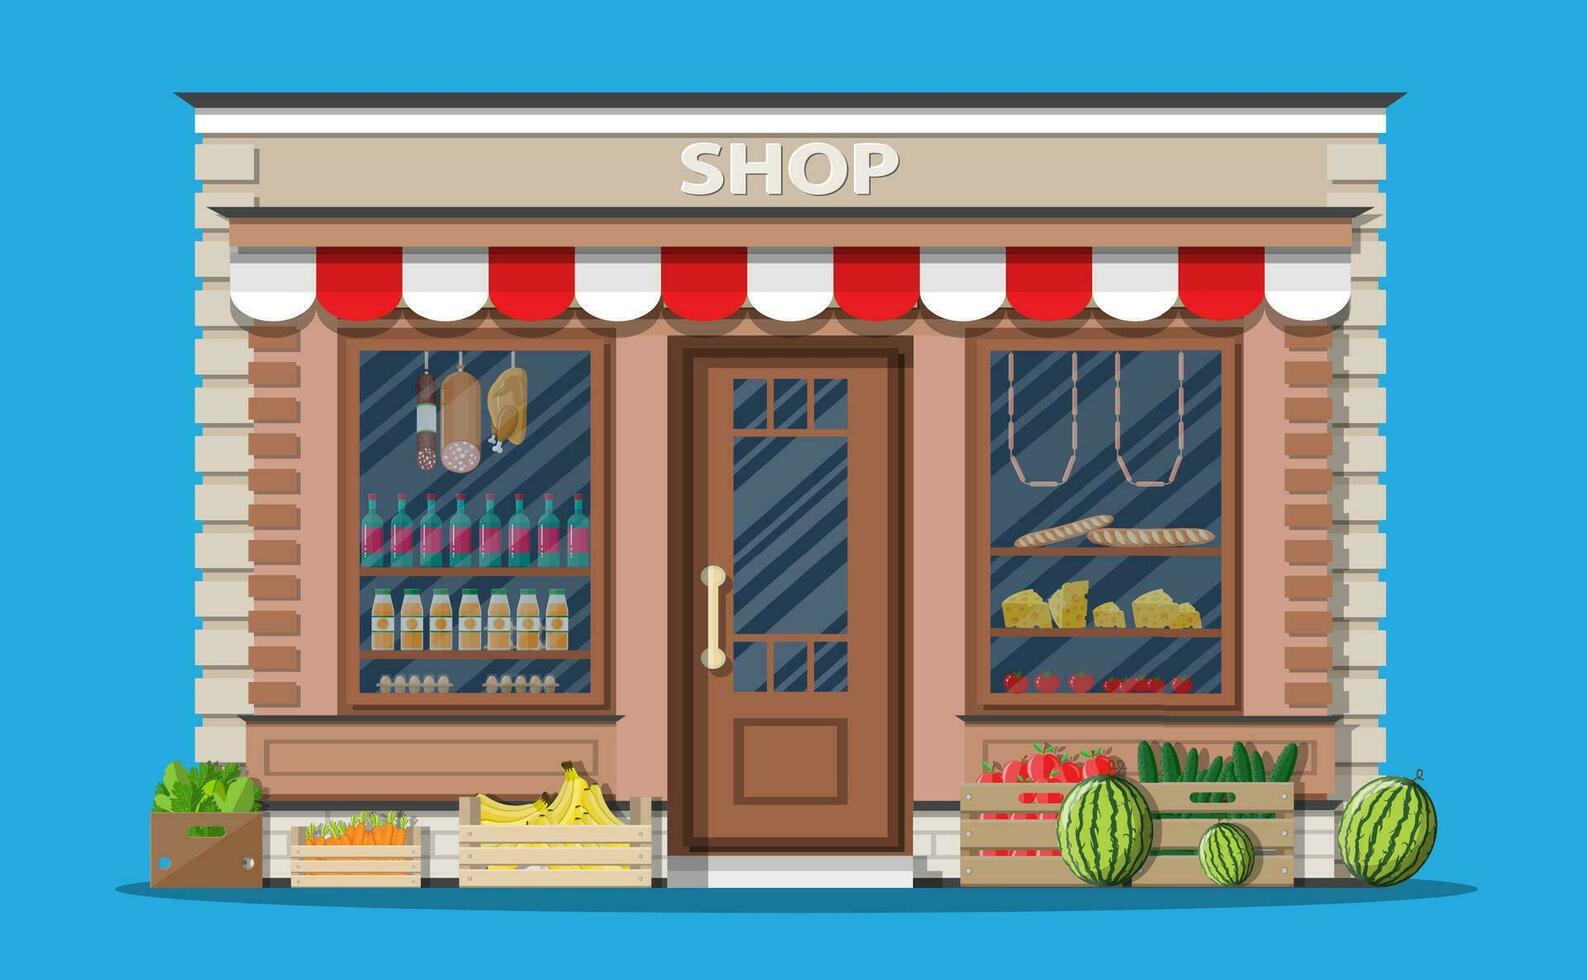 Daily products shop. Local fruit and vegetables store building. Groceries crates in front of storefront. Vector illustration in flat style